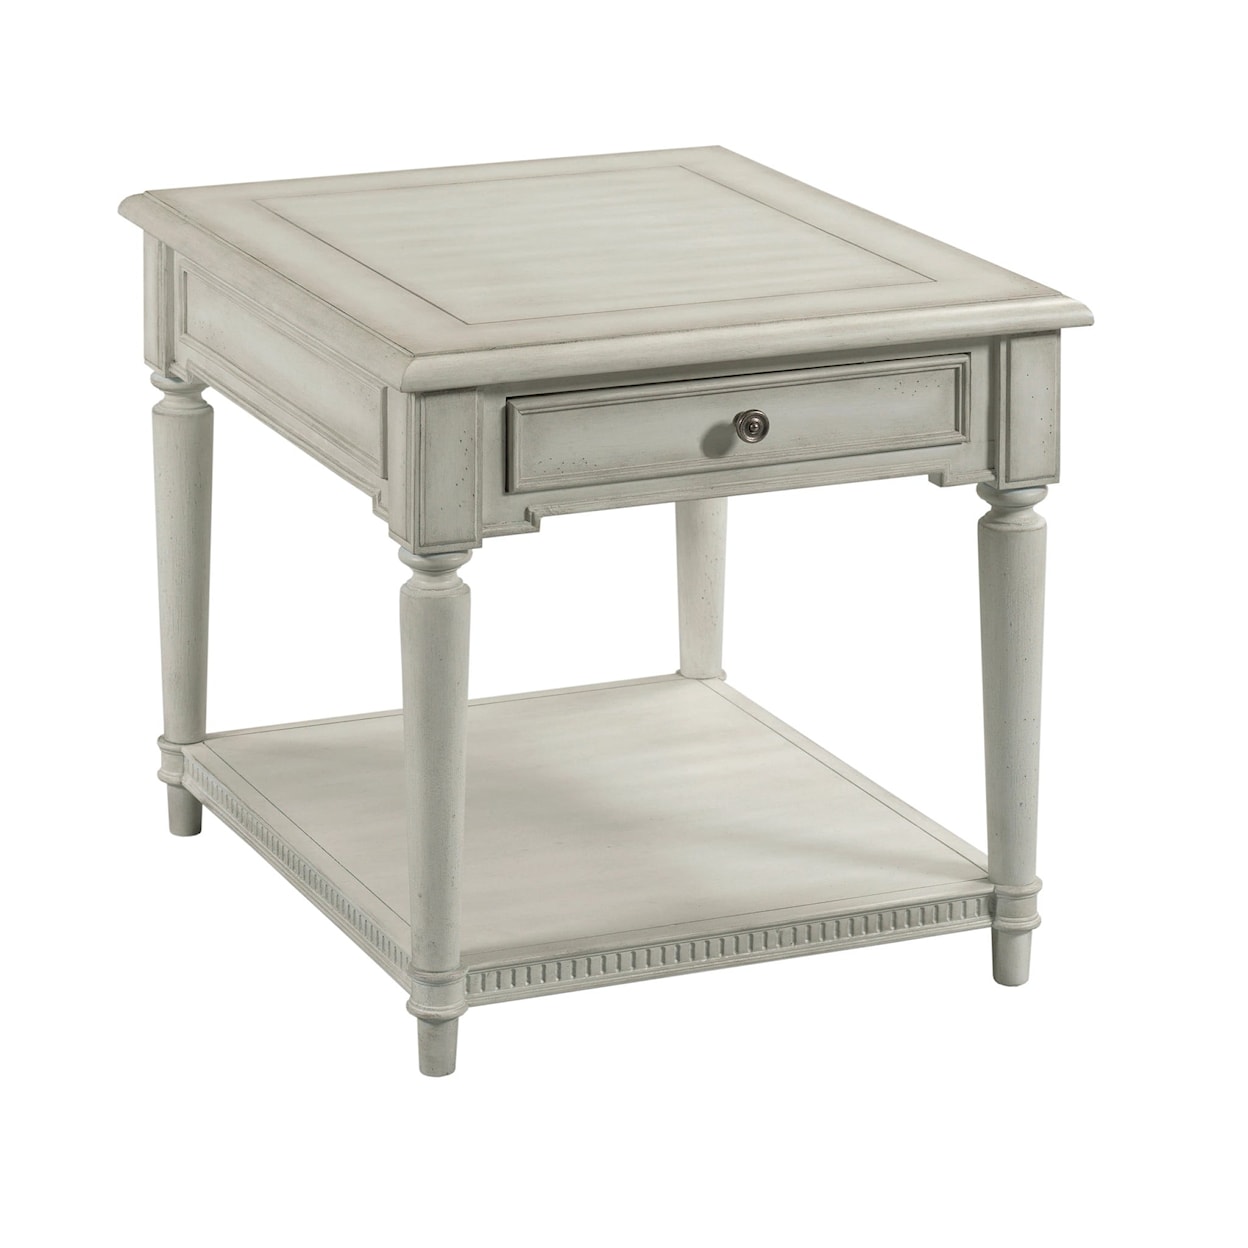 Hammary Terrace Drawer End Table